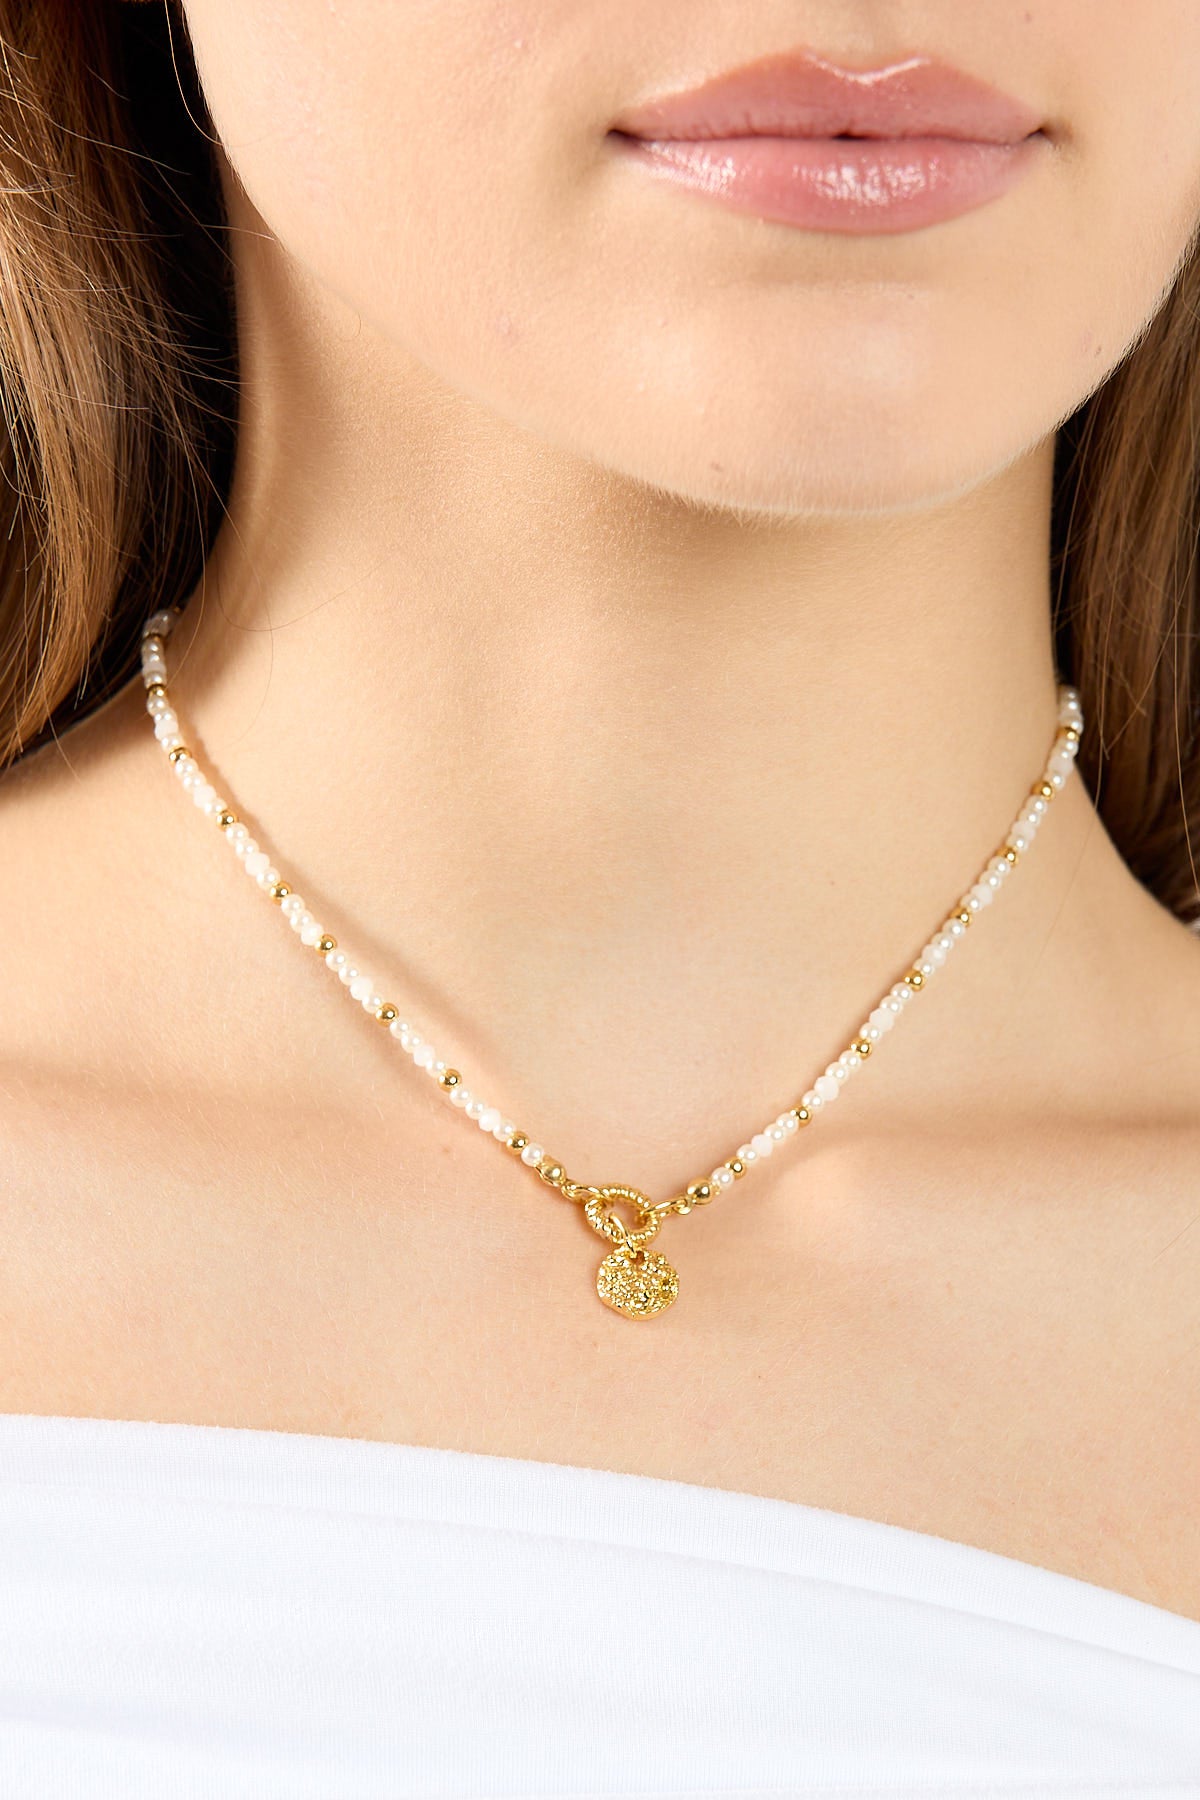 Perfect Stranger Sunrise Pearl Necklace 18k Gold Plated